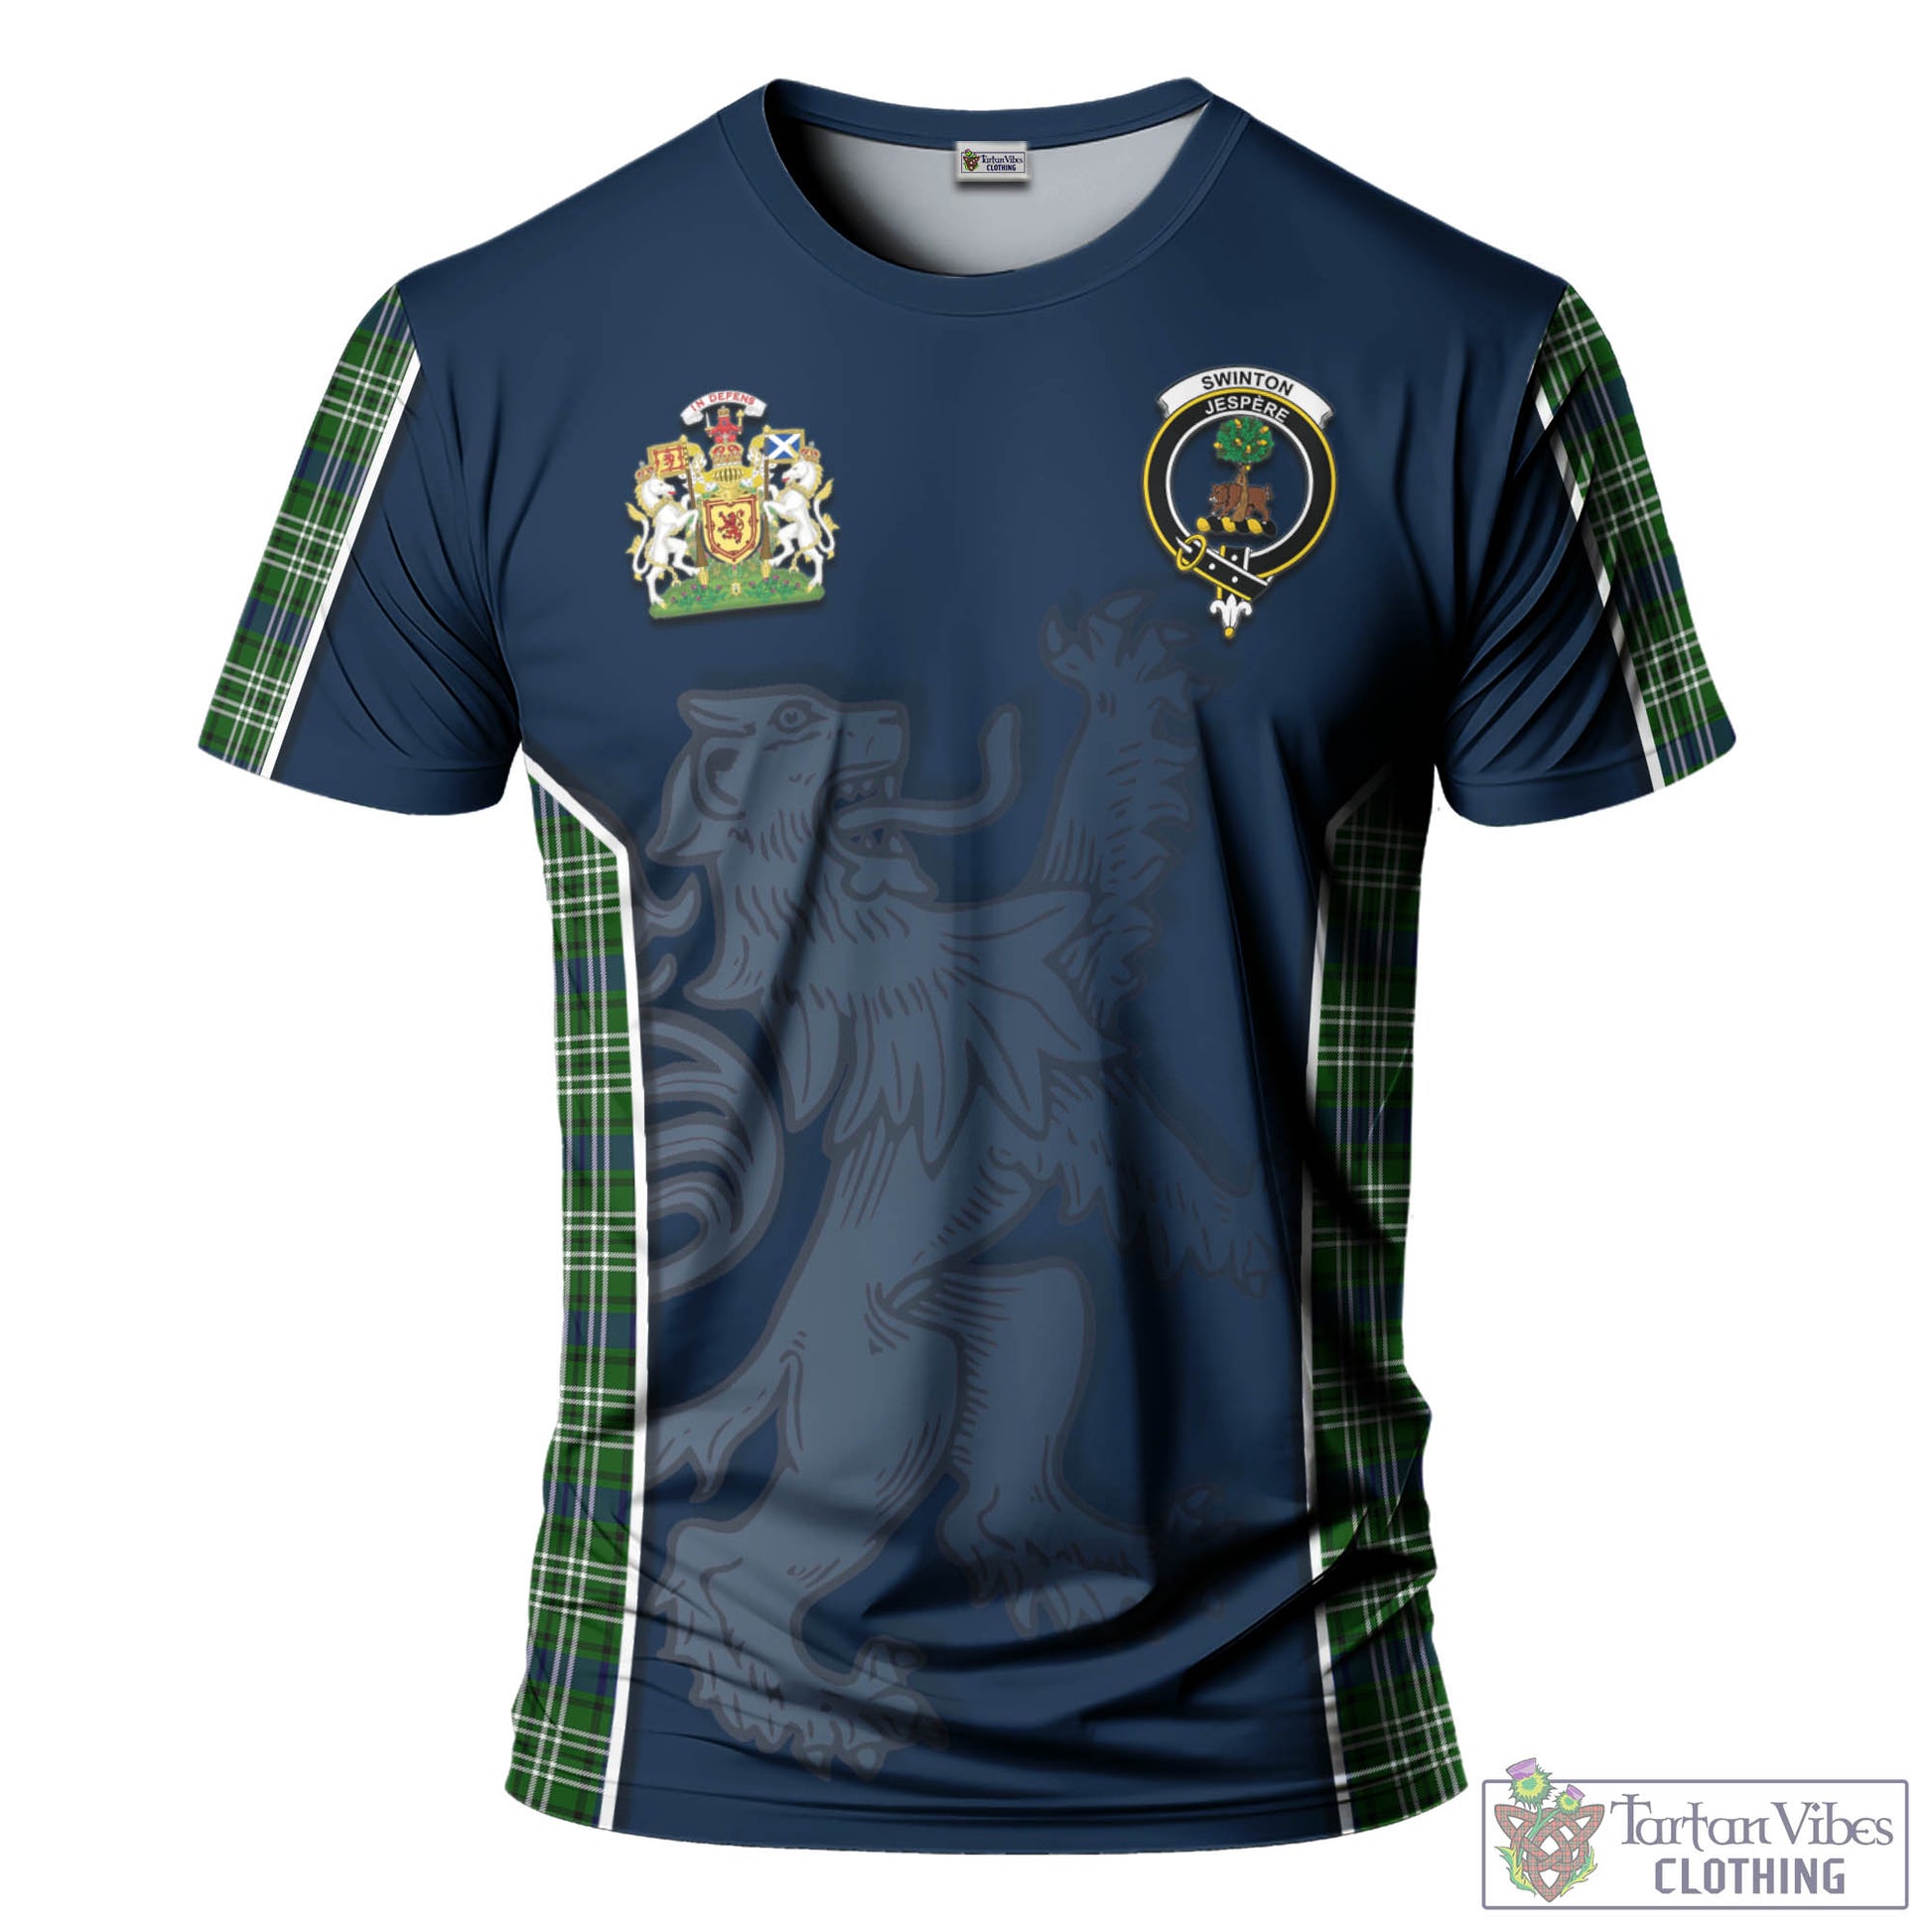 Tartan Vibes Clothing Swinton Tartan T-Shirt with Family Crest and Lion Rampant Vibes Sport Style